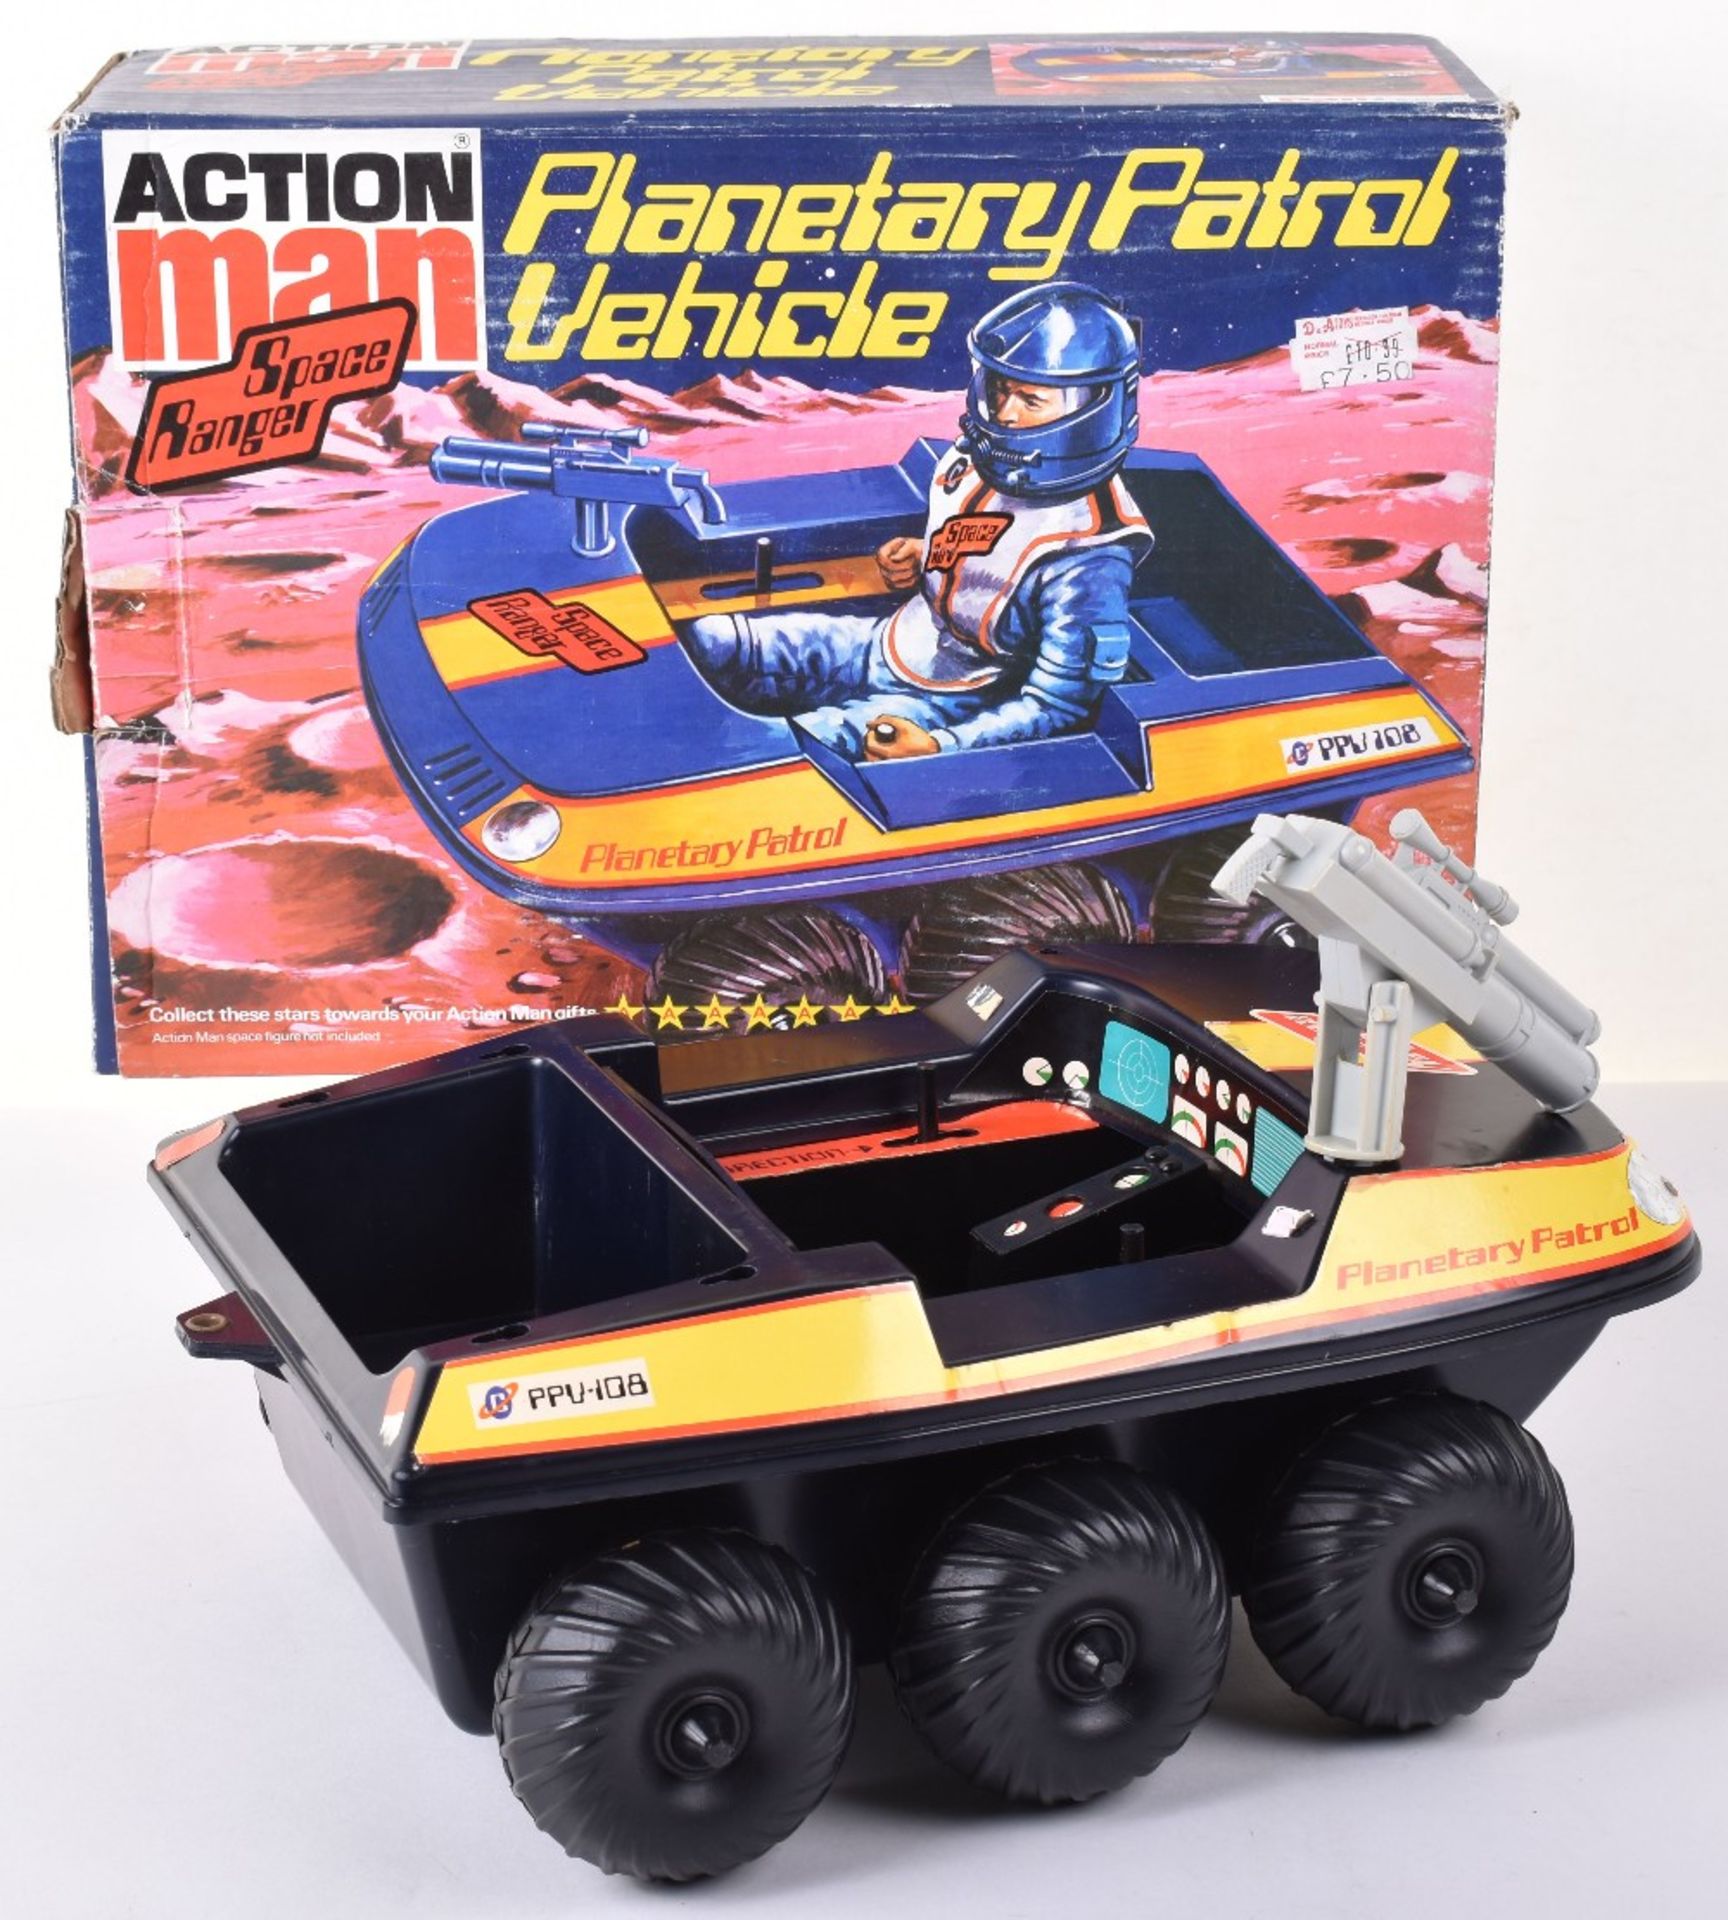 Scarce Boxed Action Man Space Ranger Planetary Patrol Vehicle - Image 2 of 4